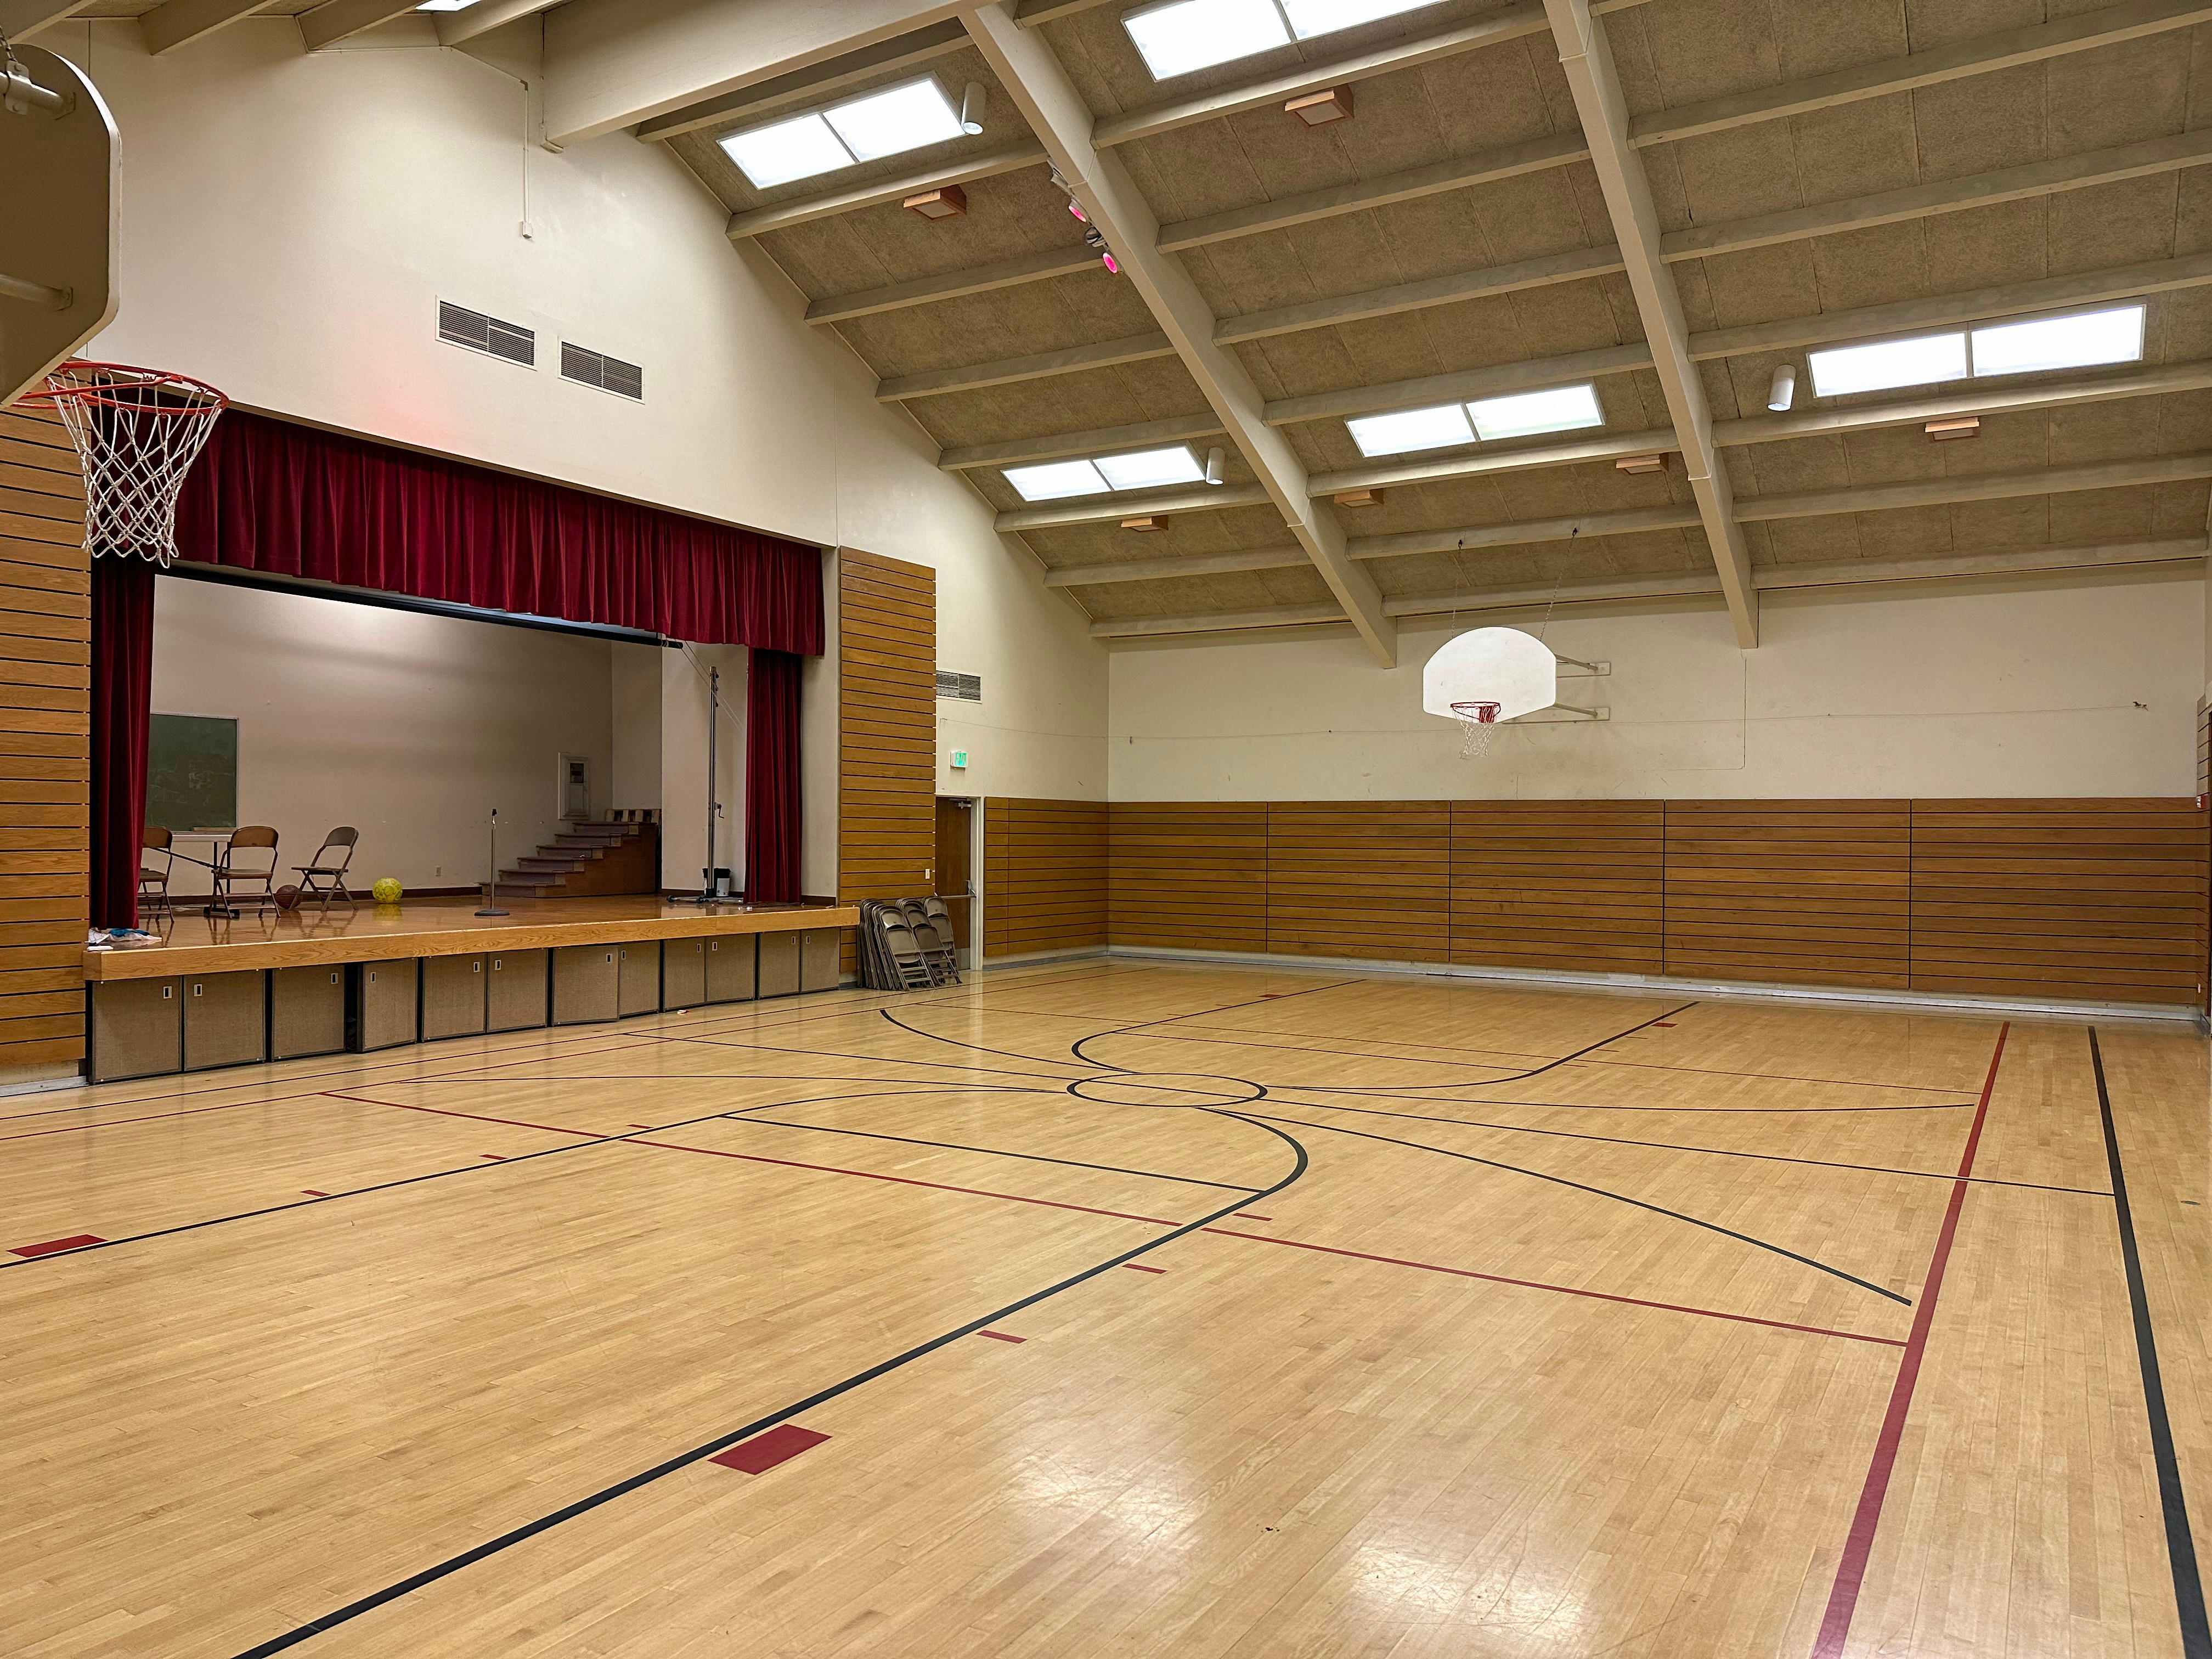 Gymnasium and stage for youth activities, dinners and other activities